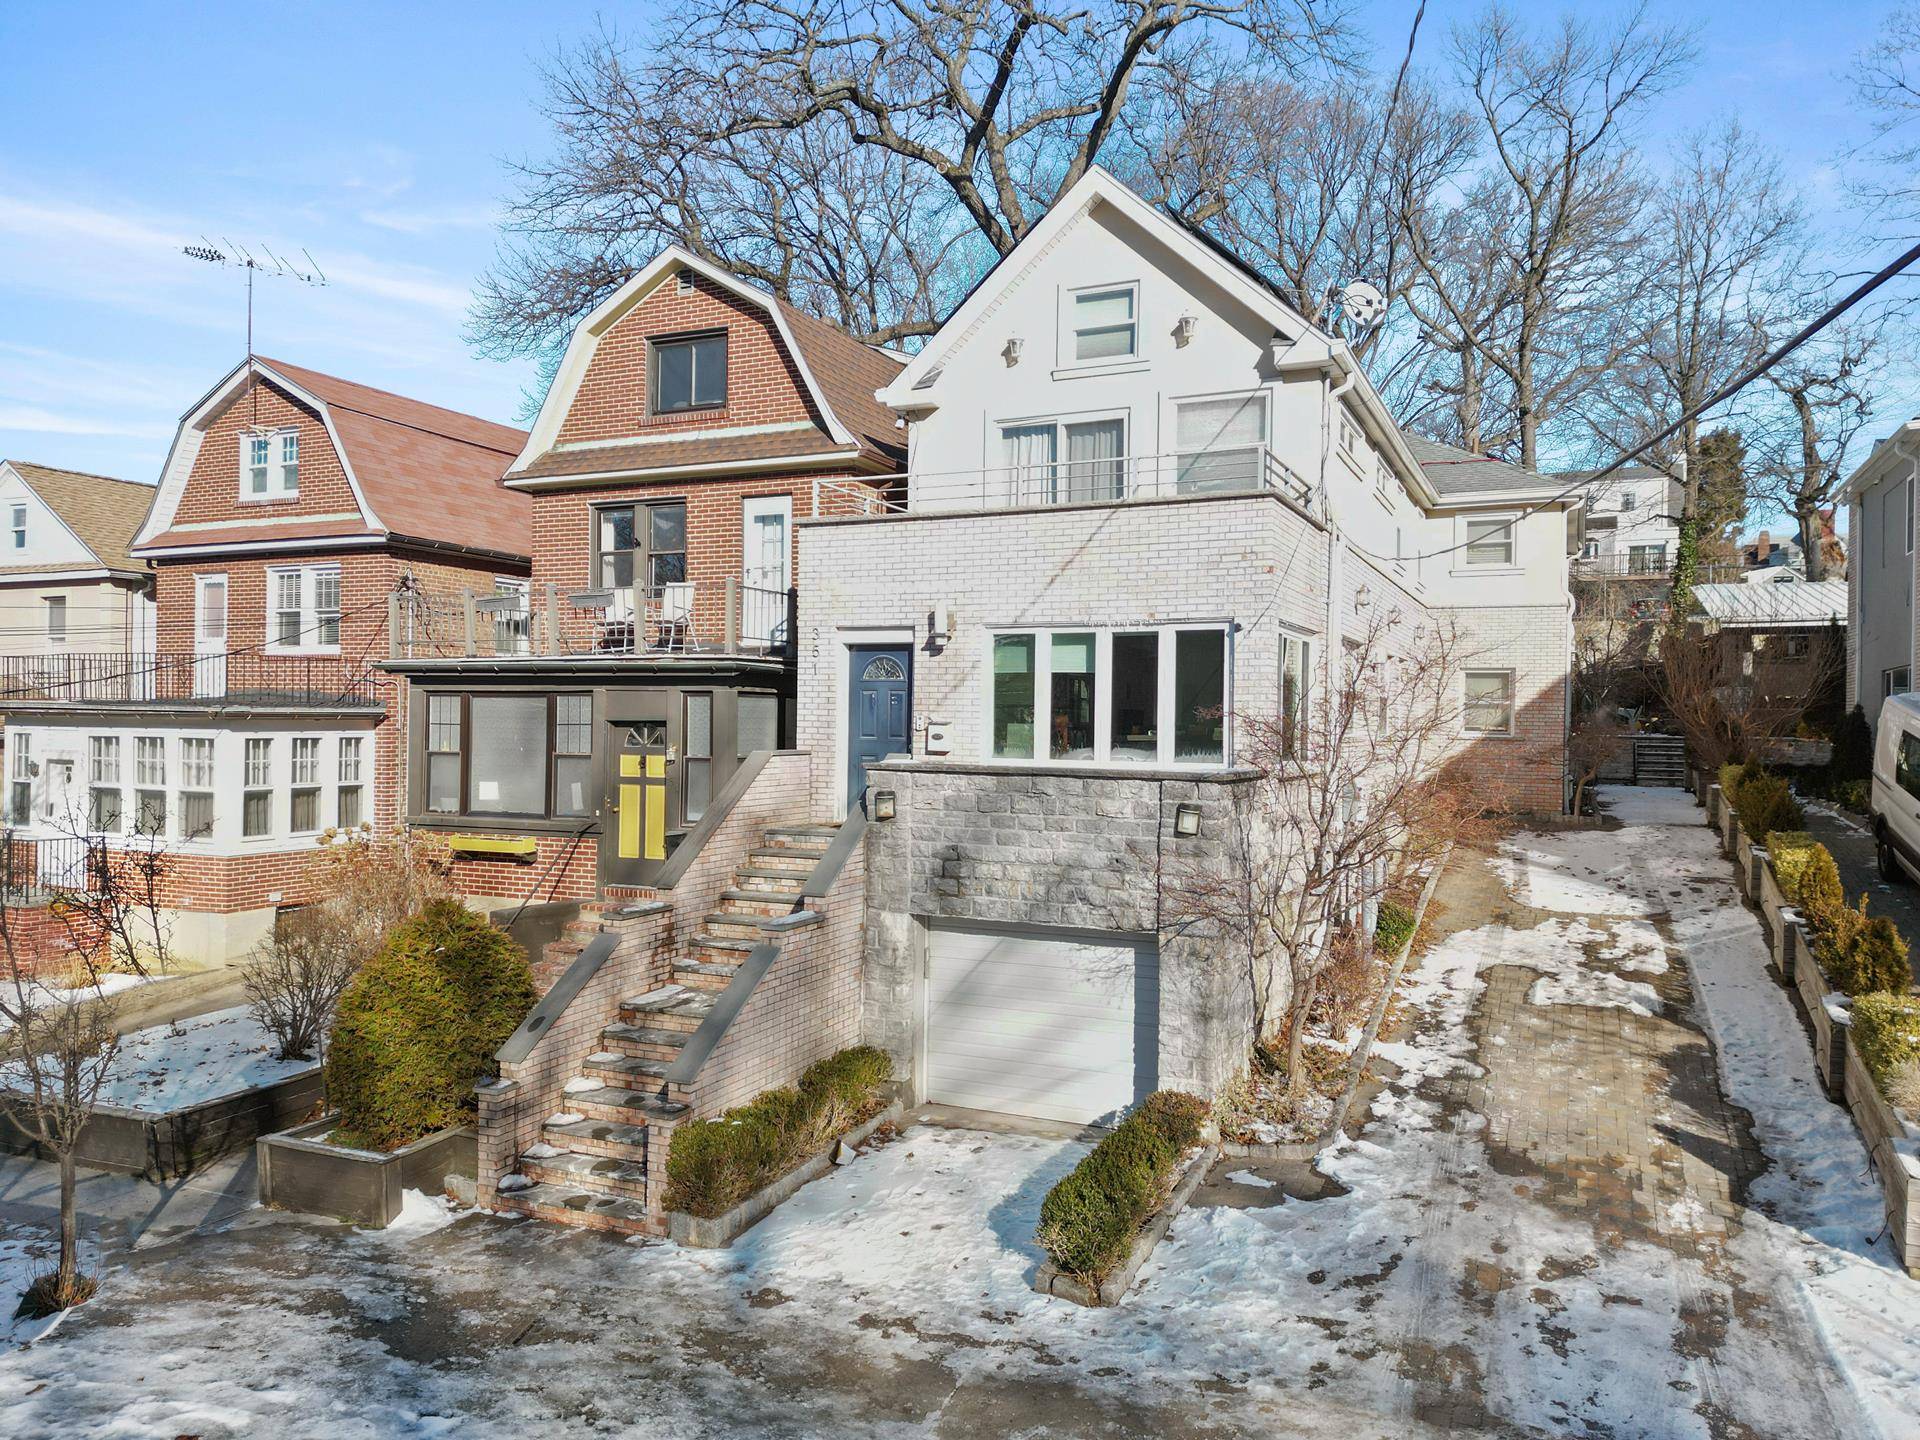 Unparalleled in North Riverdale, this unique modern home has been renovated with the utmost care.